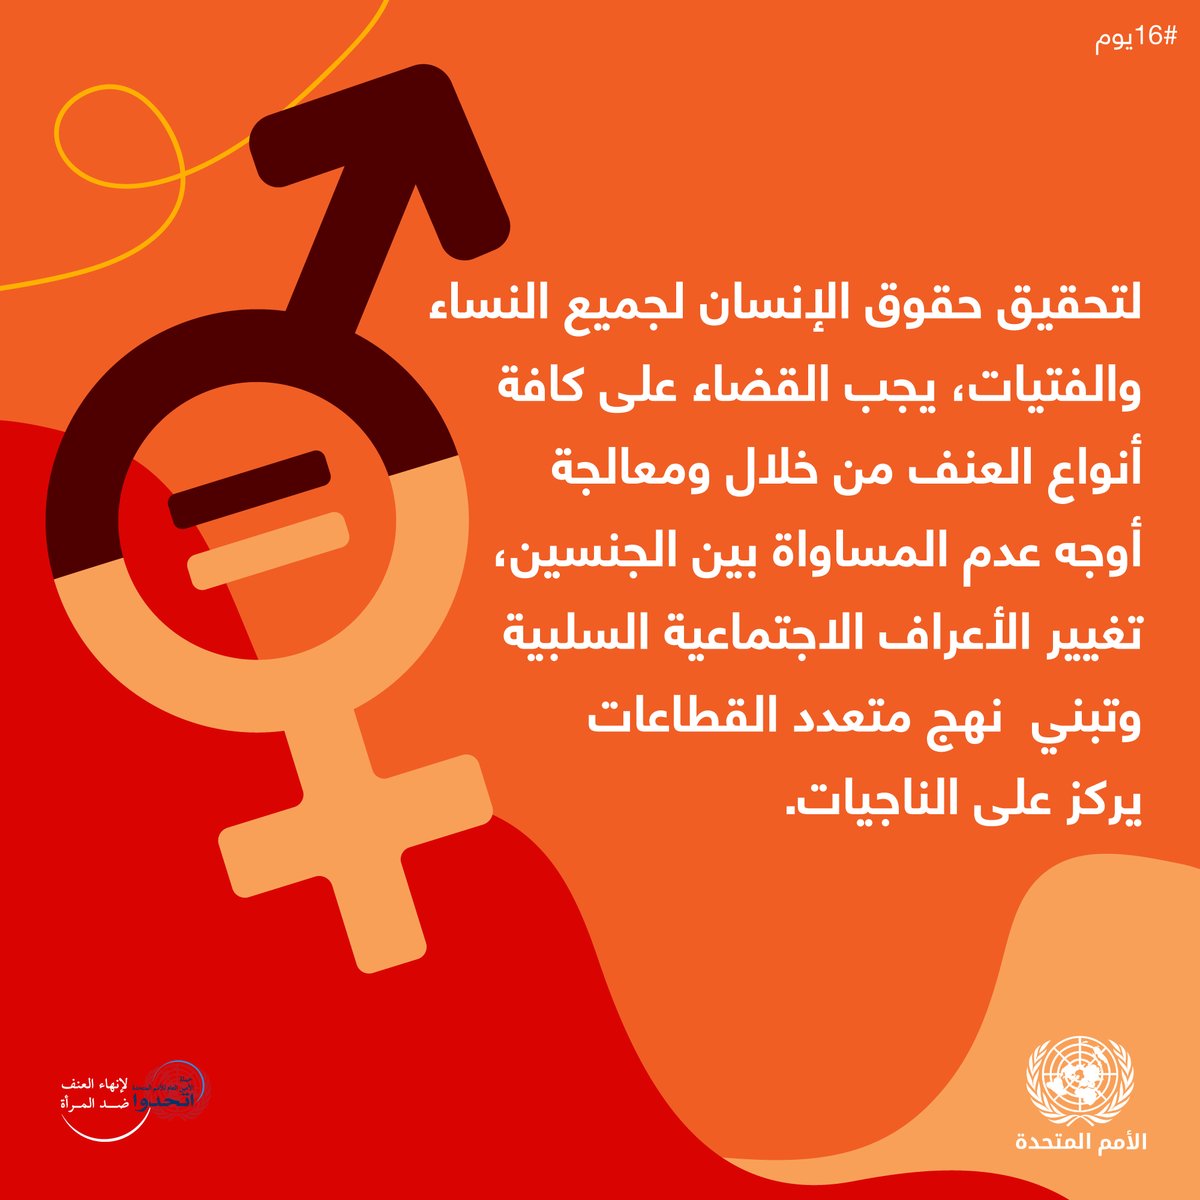 Ending #GBV and violence against women & girls is not the job of one entity alone. All stakeholders - with communities and civil society at the core - have an important role to play. 

Together, we #StandUp4HumanRights in #ArabStates and beyond.

#16Days